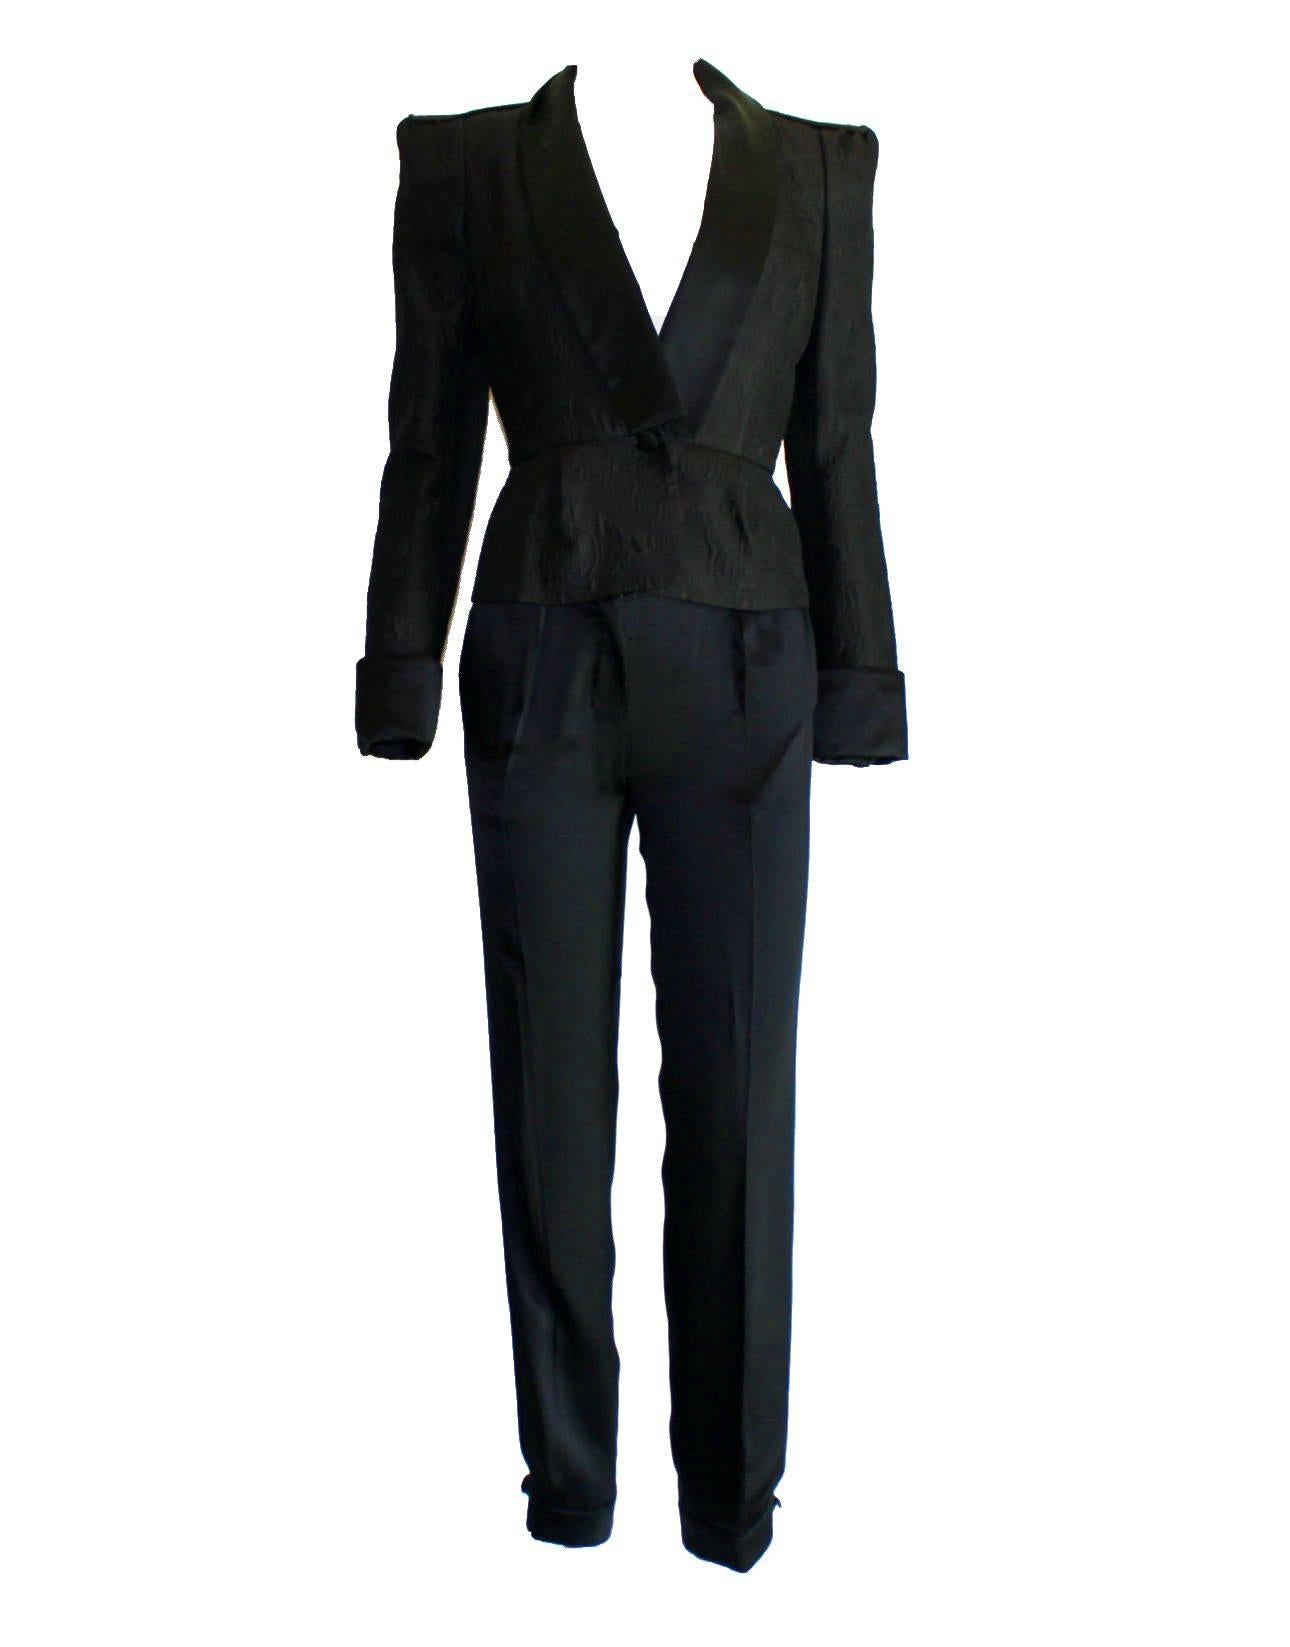 Yves Saint Laurent by Tom Ford 2004 Chinoiserie Tuxedo Smoking Evening Suit 34 For Sale 2